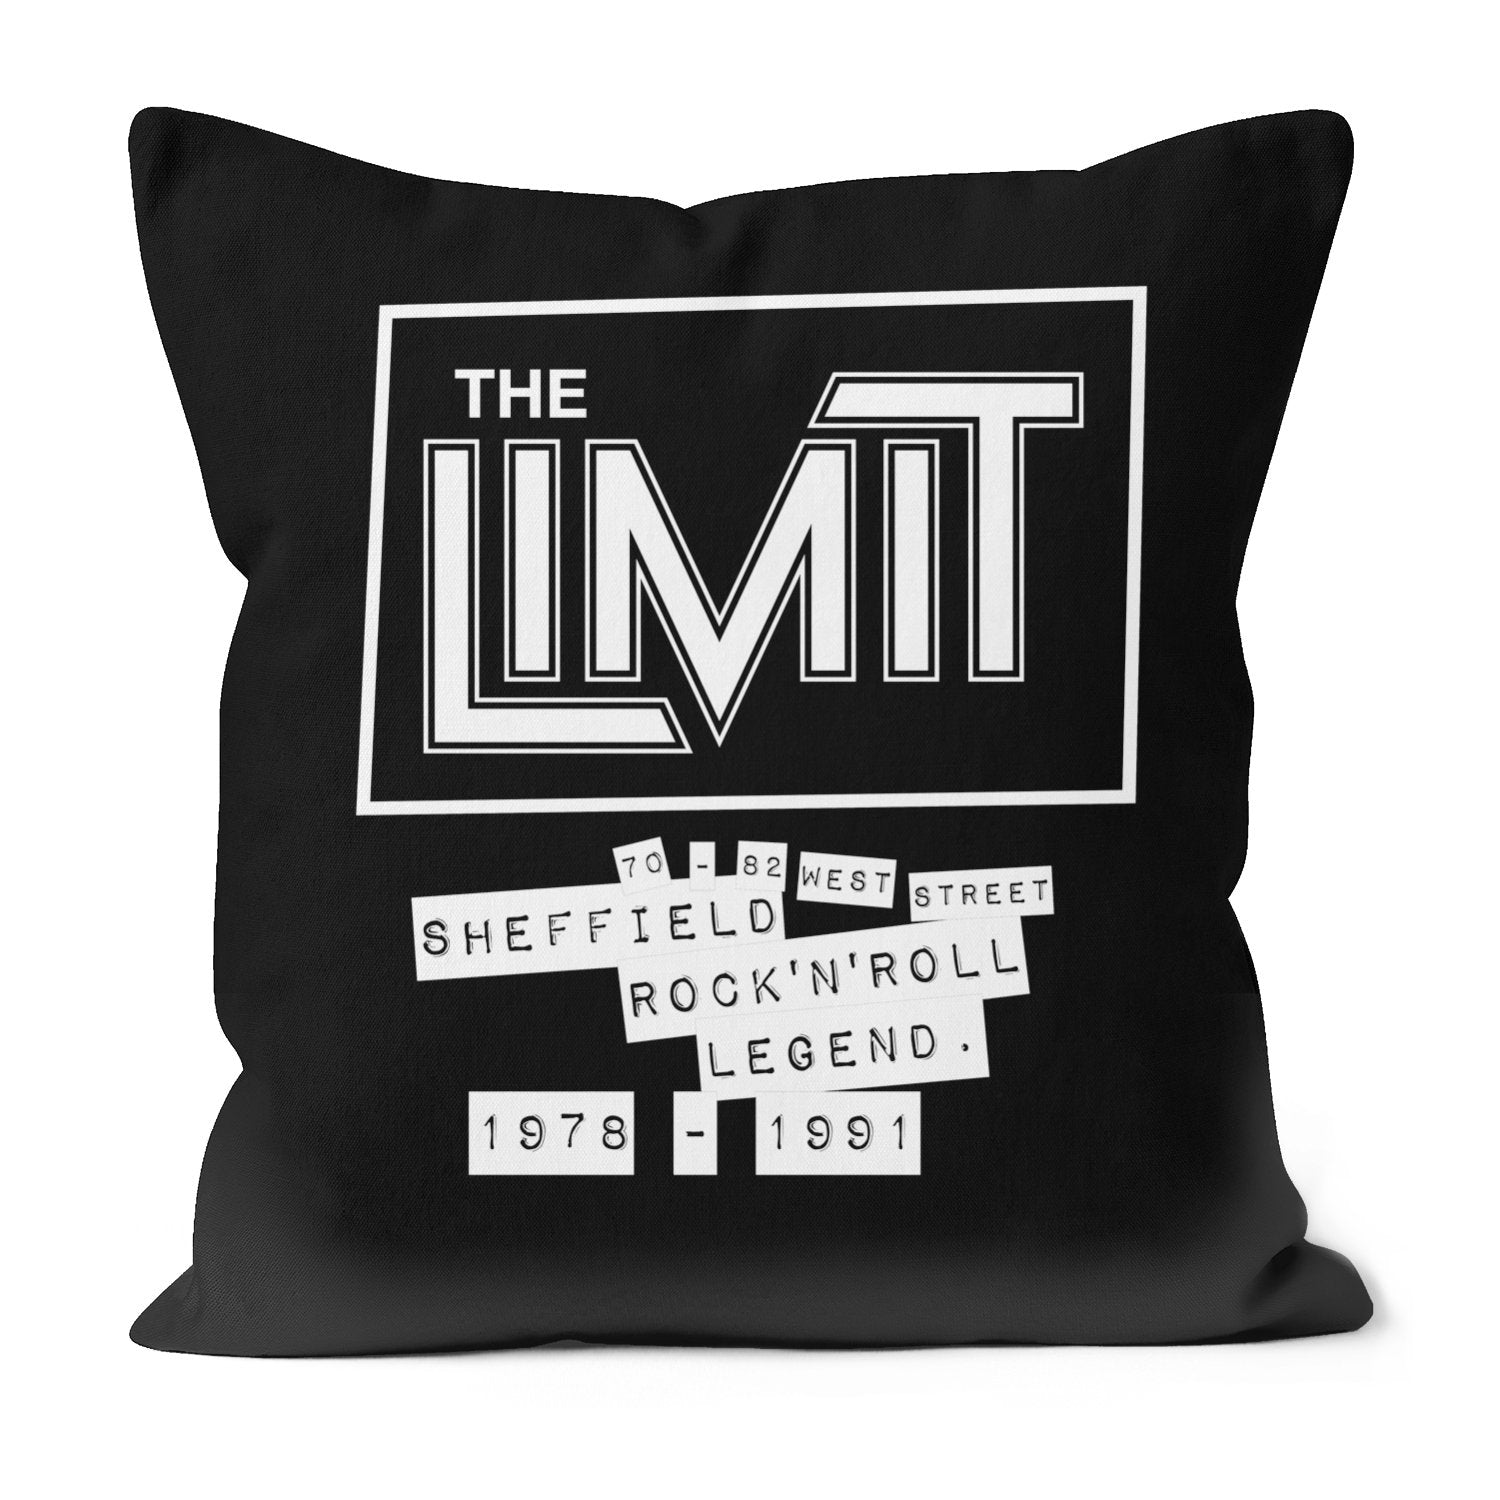 Limit - handmade cushion - Dirty Stop Outs